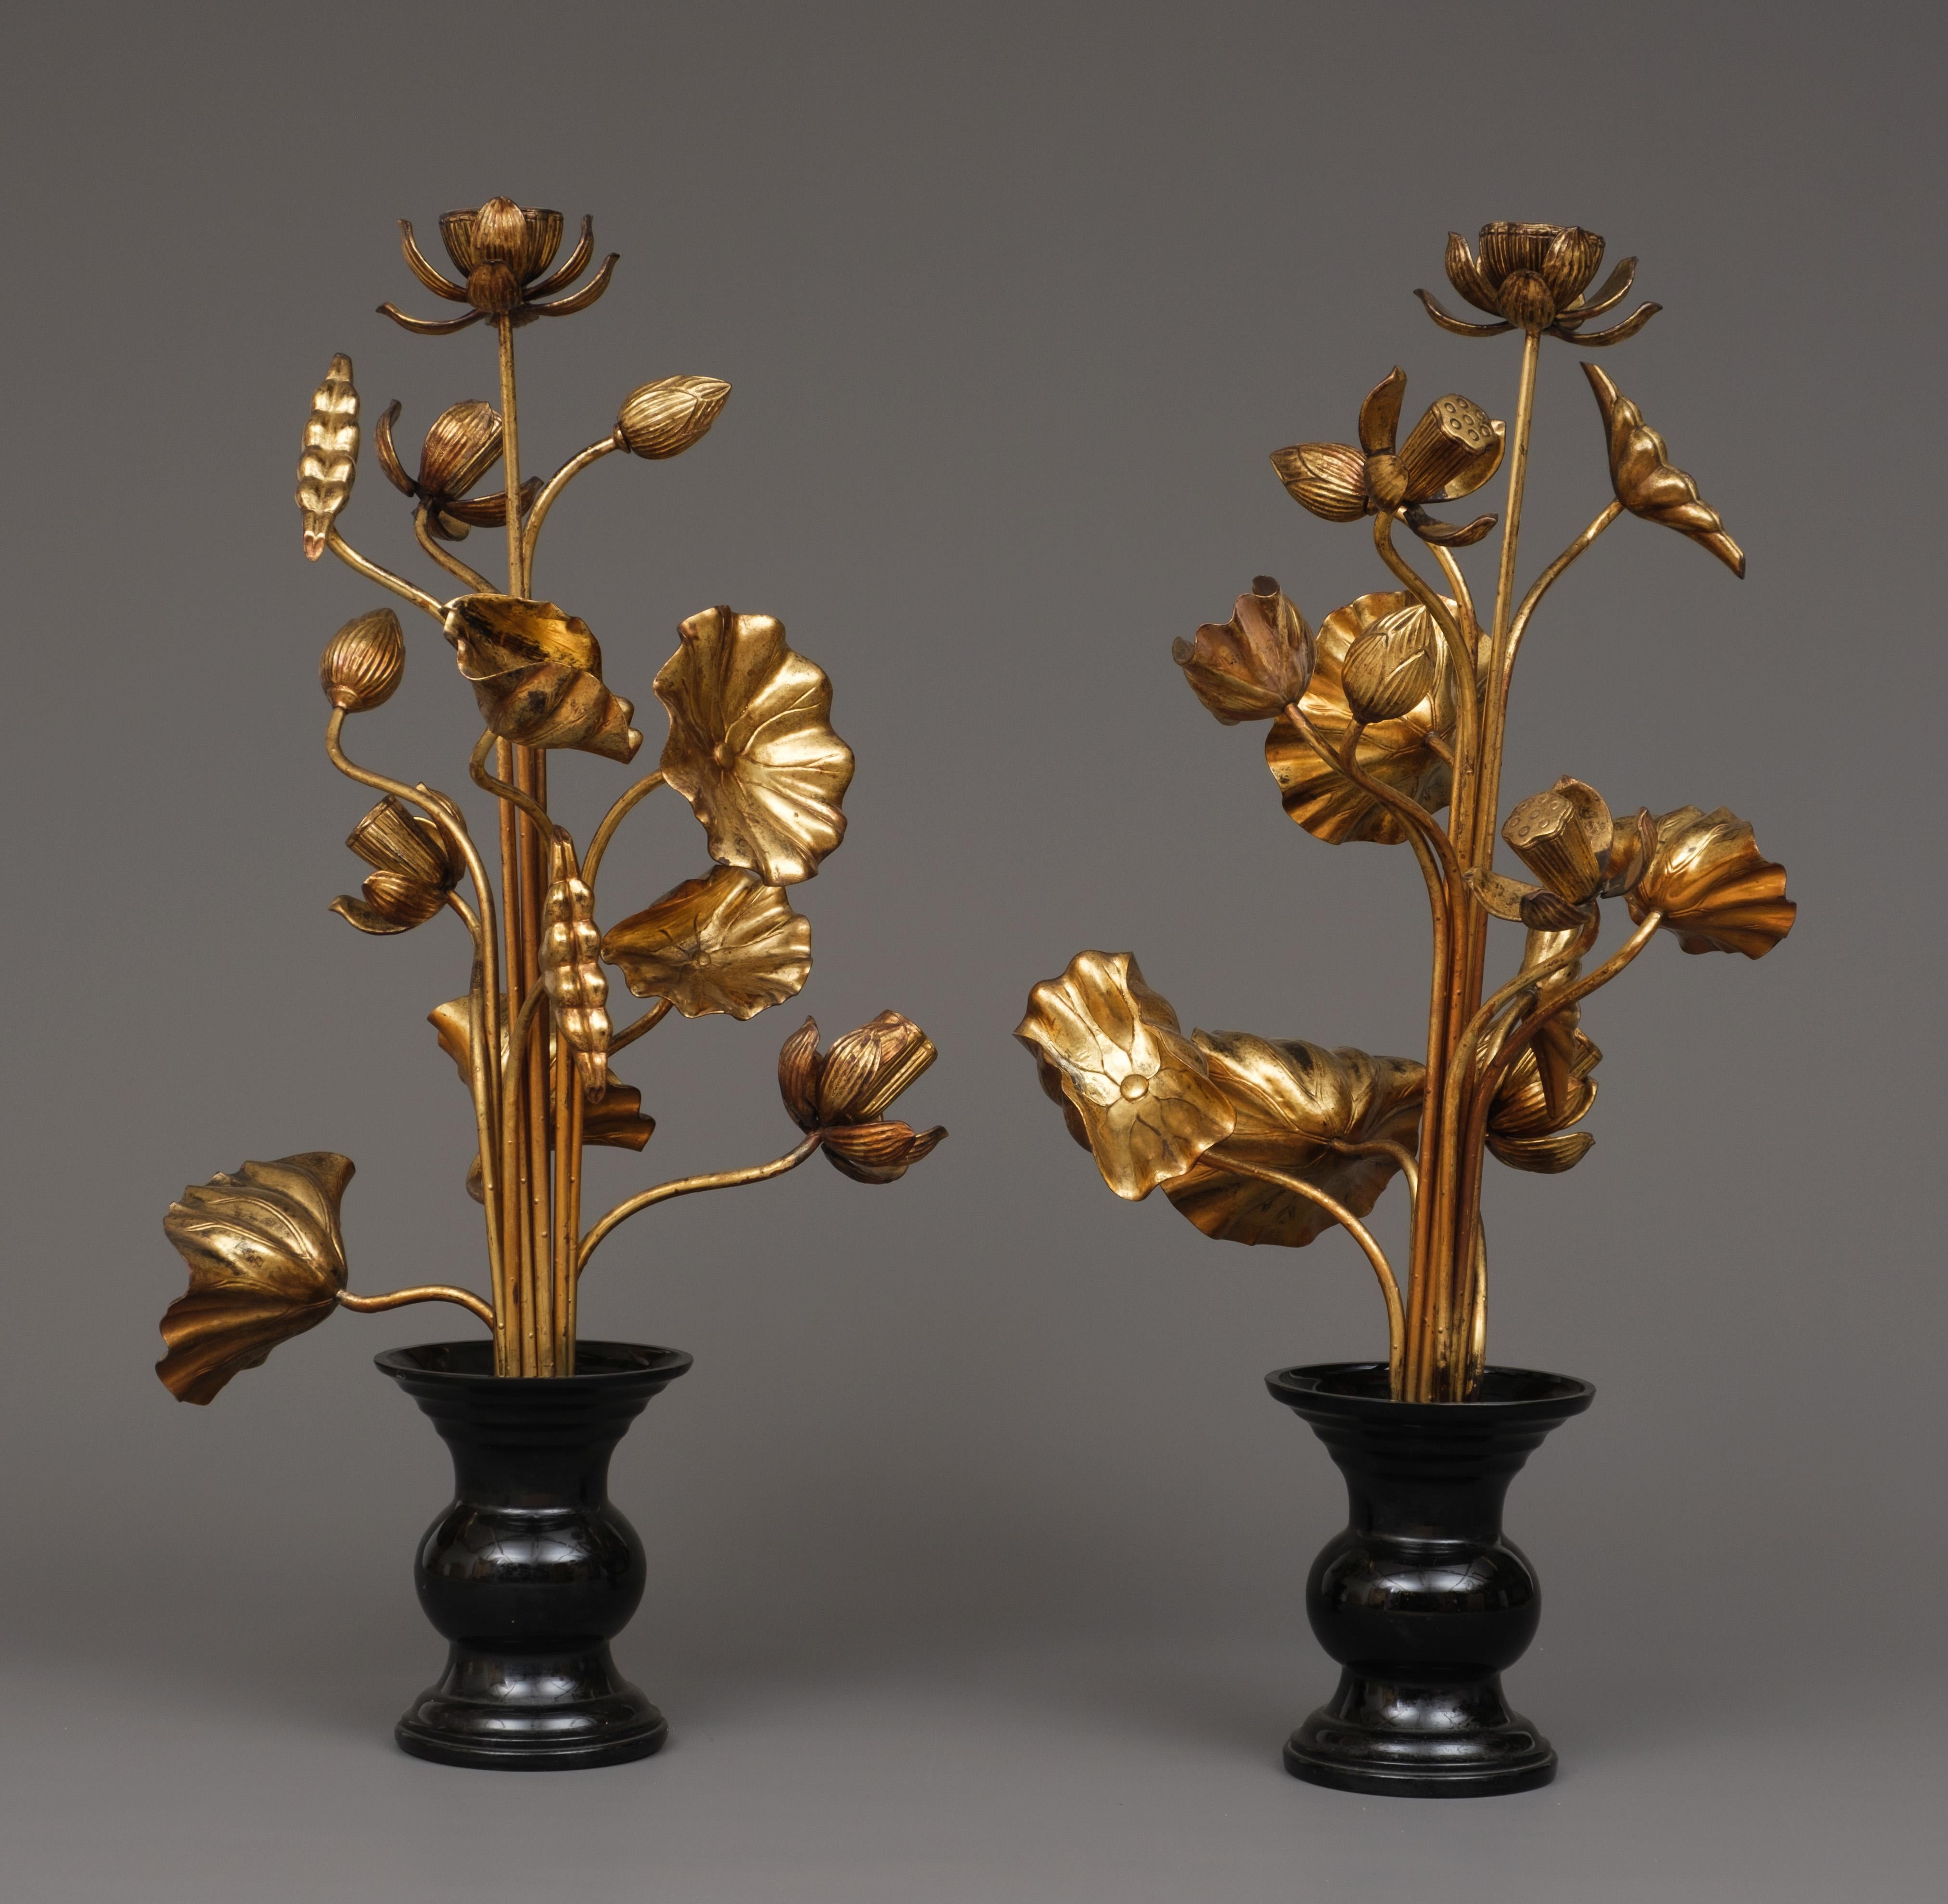 Glass Large pair of Japanese ‘Jyôka’ 常花, sets of gilded lotus flowers and -leaves.